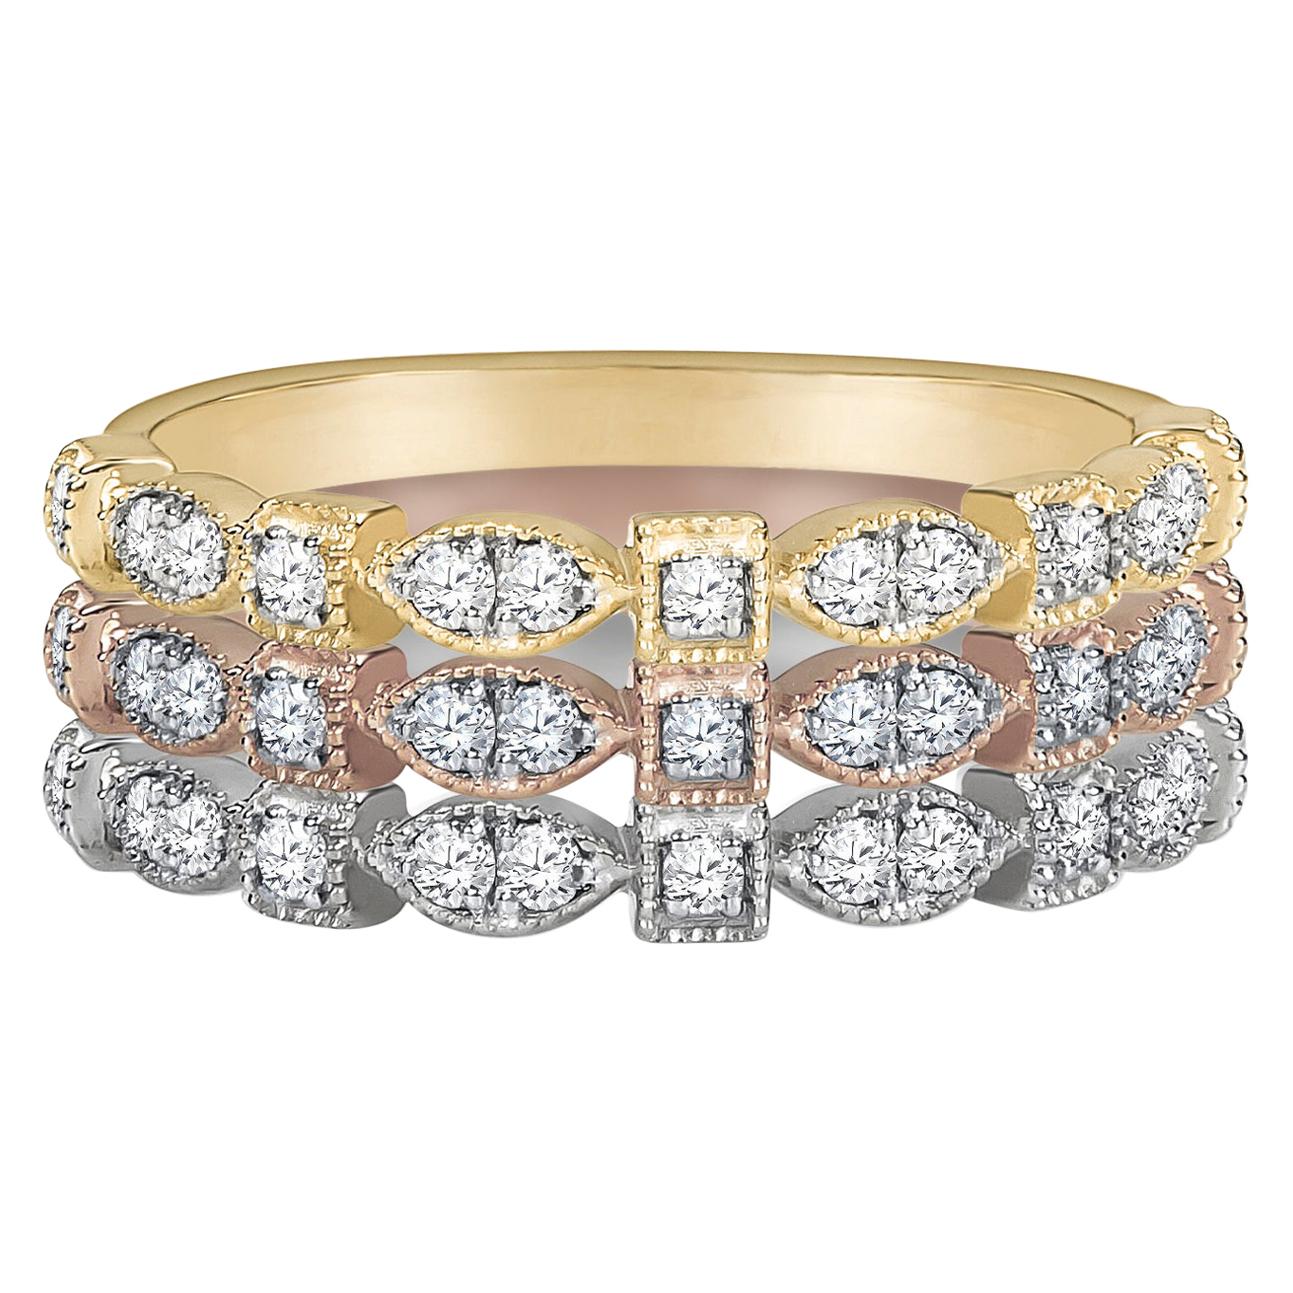 0.16 Carat 14 Karat Gold Diamond Stackable Ring in White, Yellow and Rose Gold For Sale